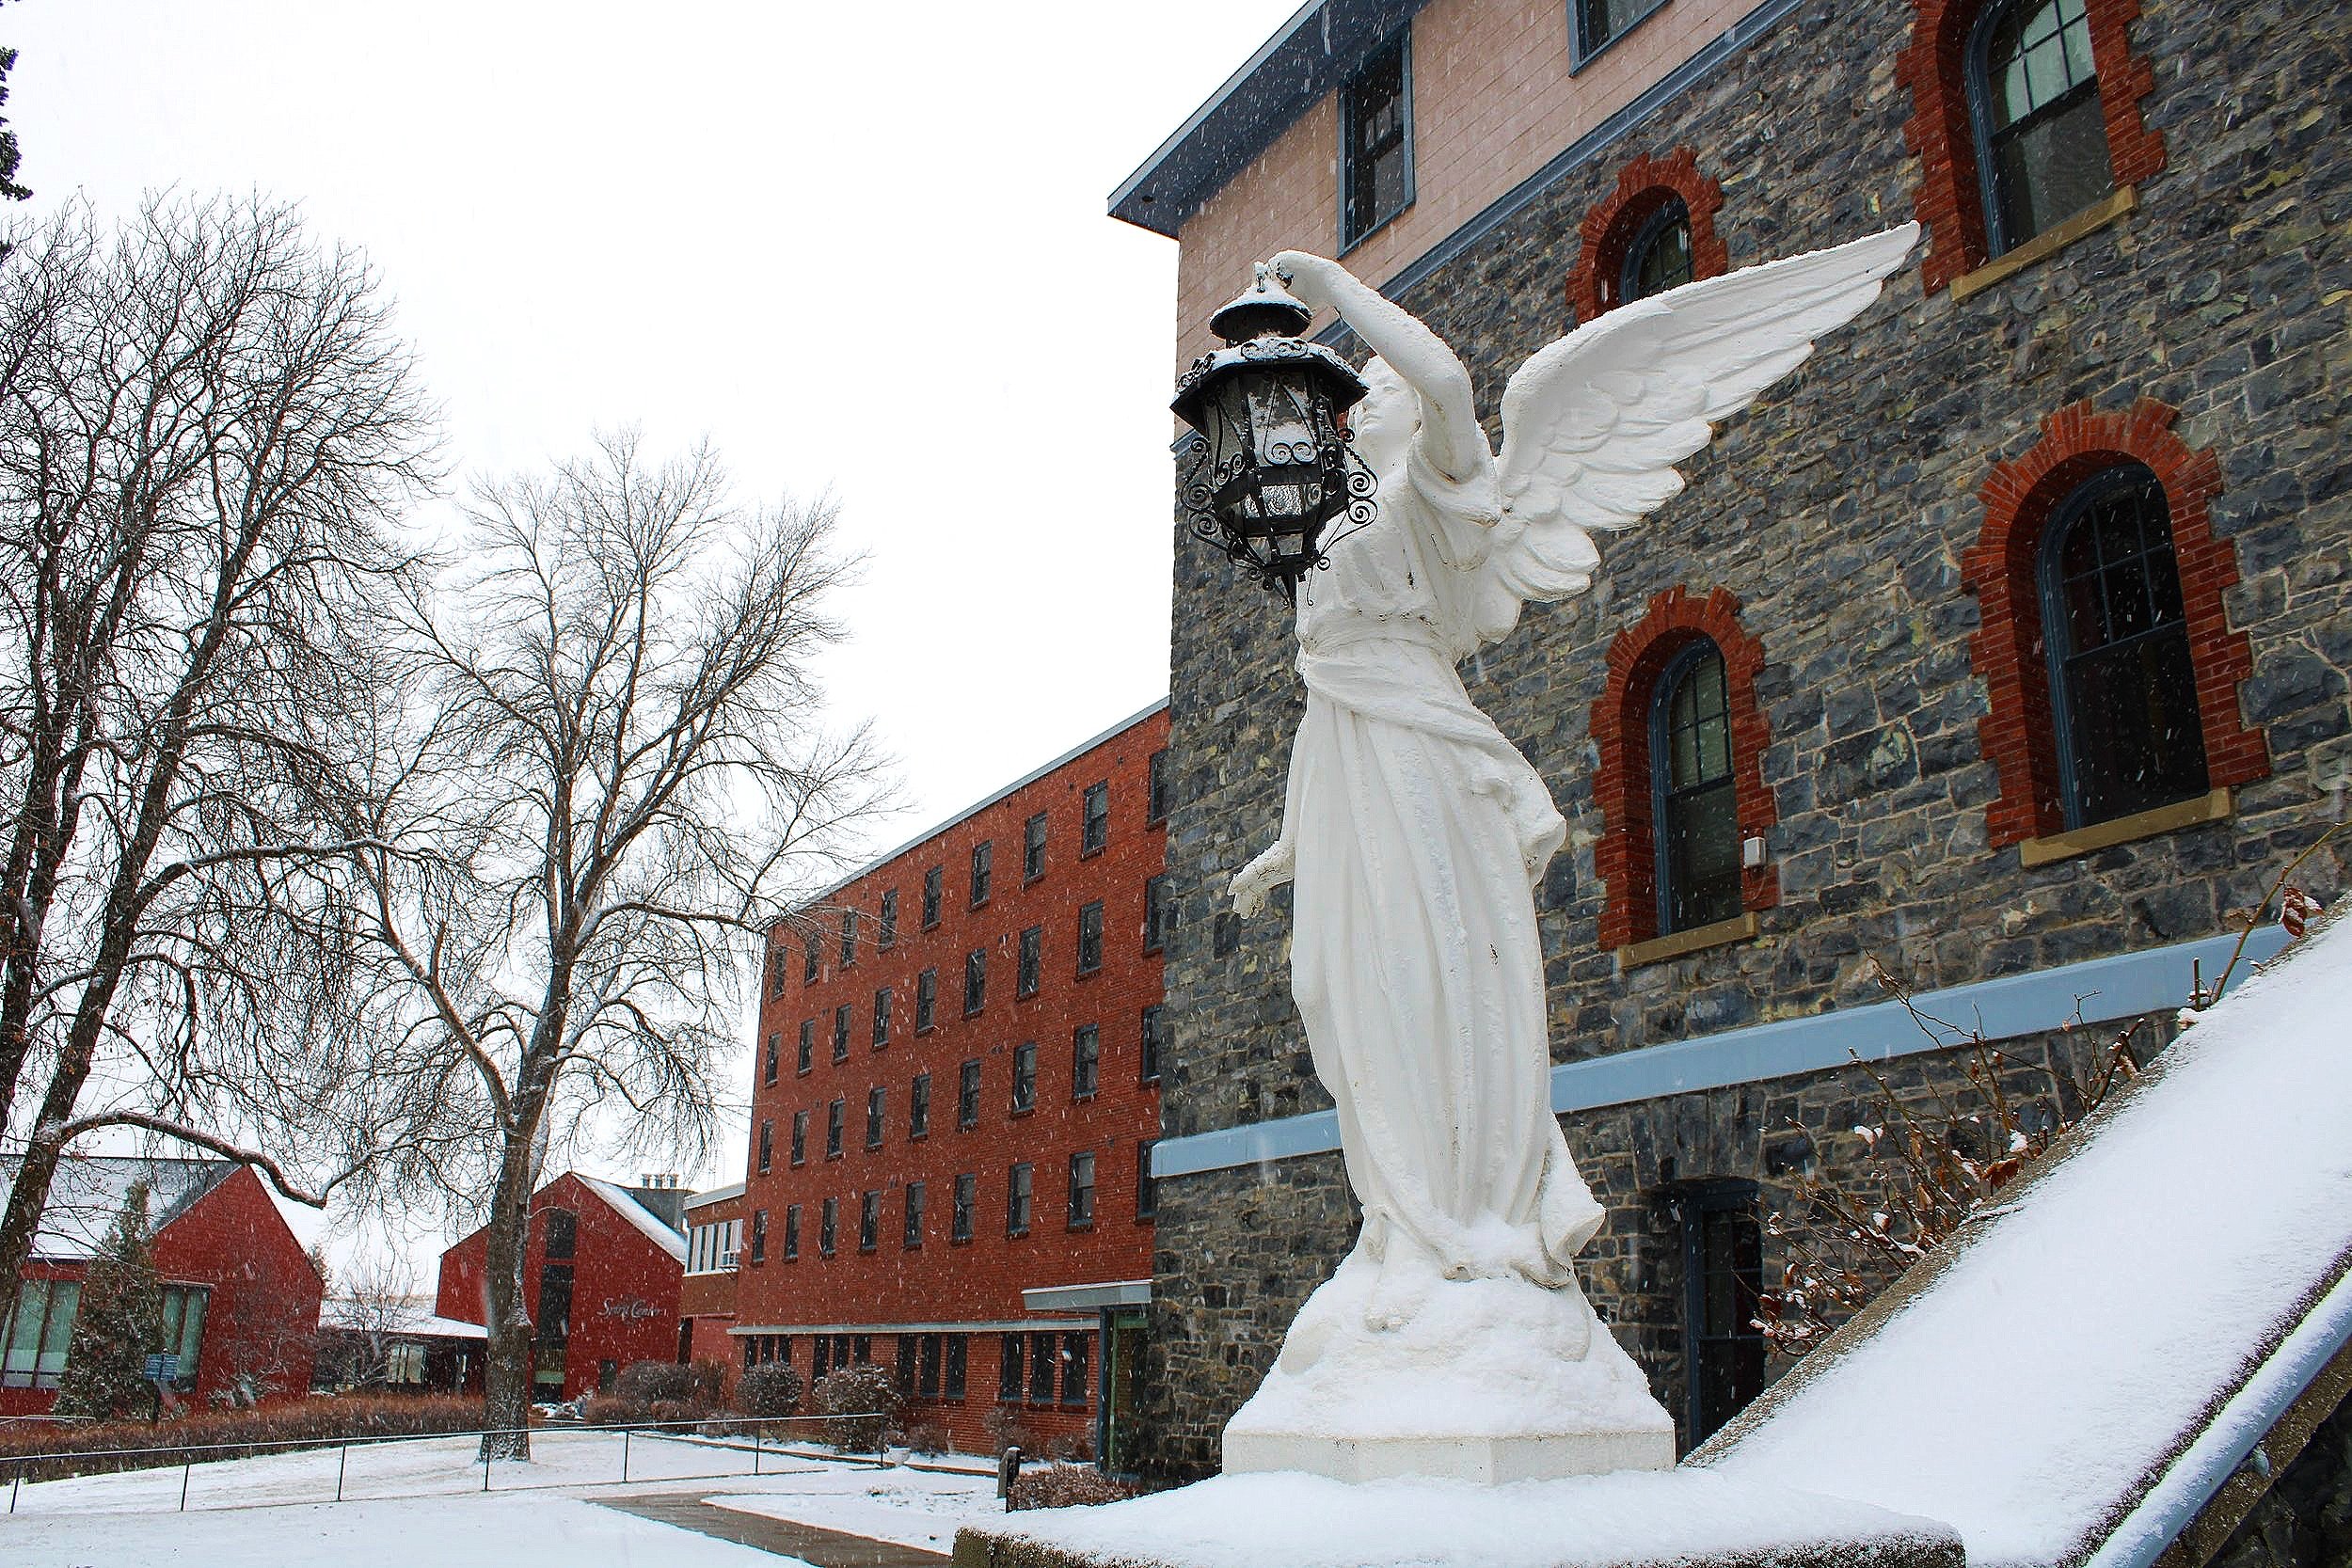    St. Gertrude’s blanketed in snow. Photos by Jaqueline Lopez.   